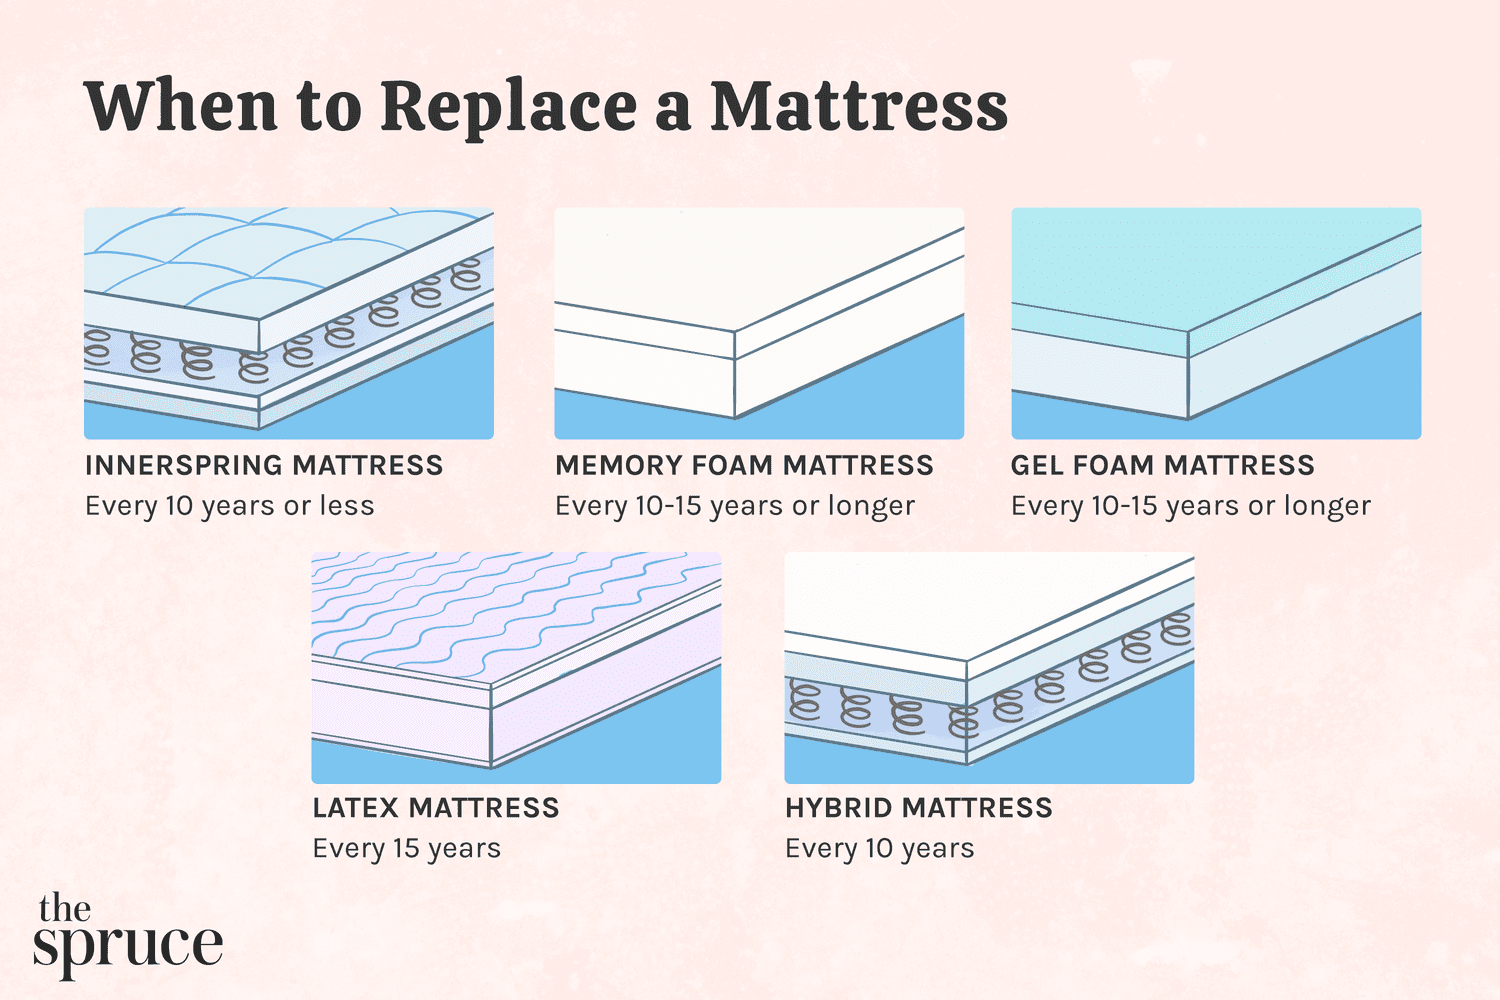 Industry Standards On Mattress Replacement